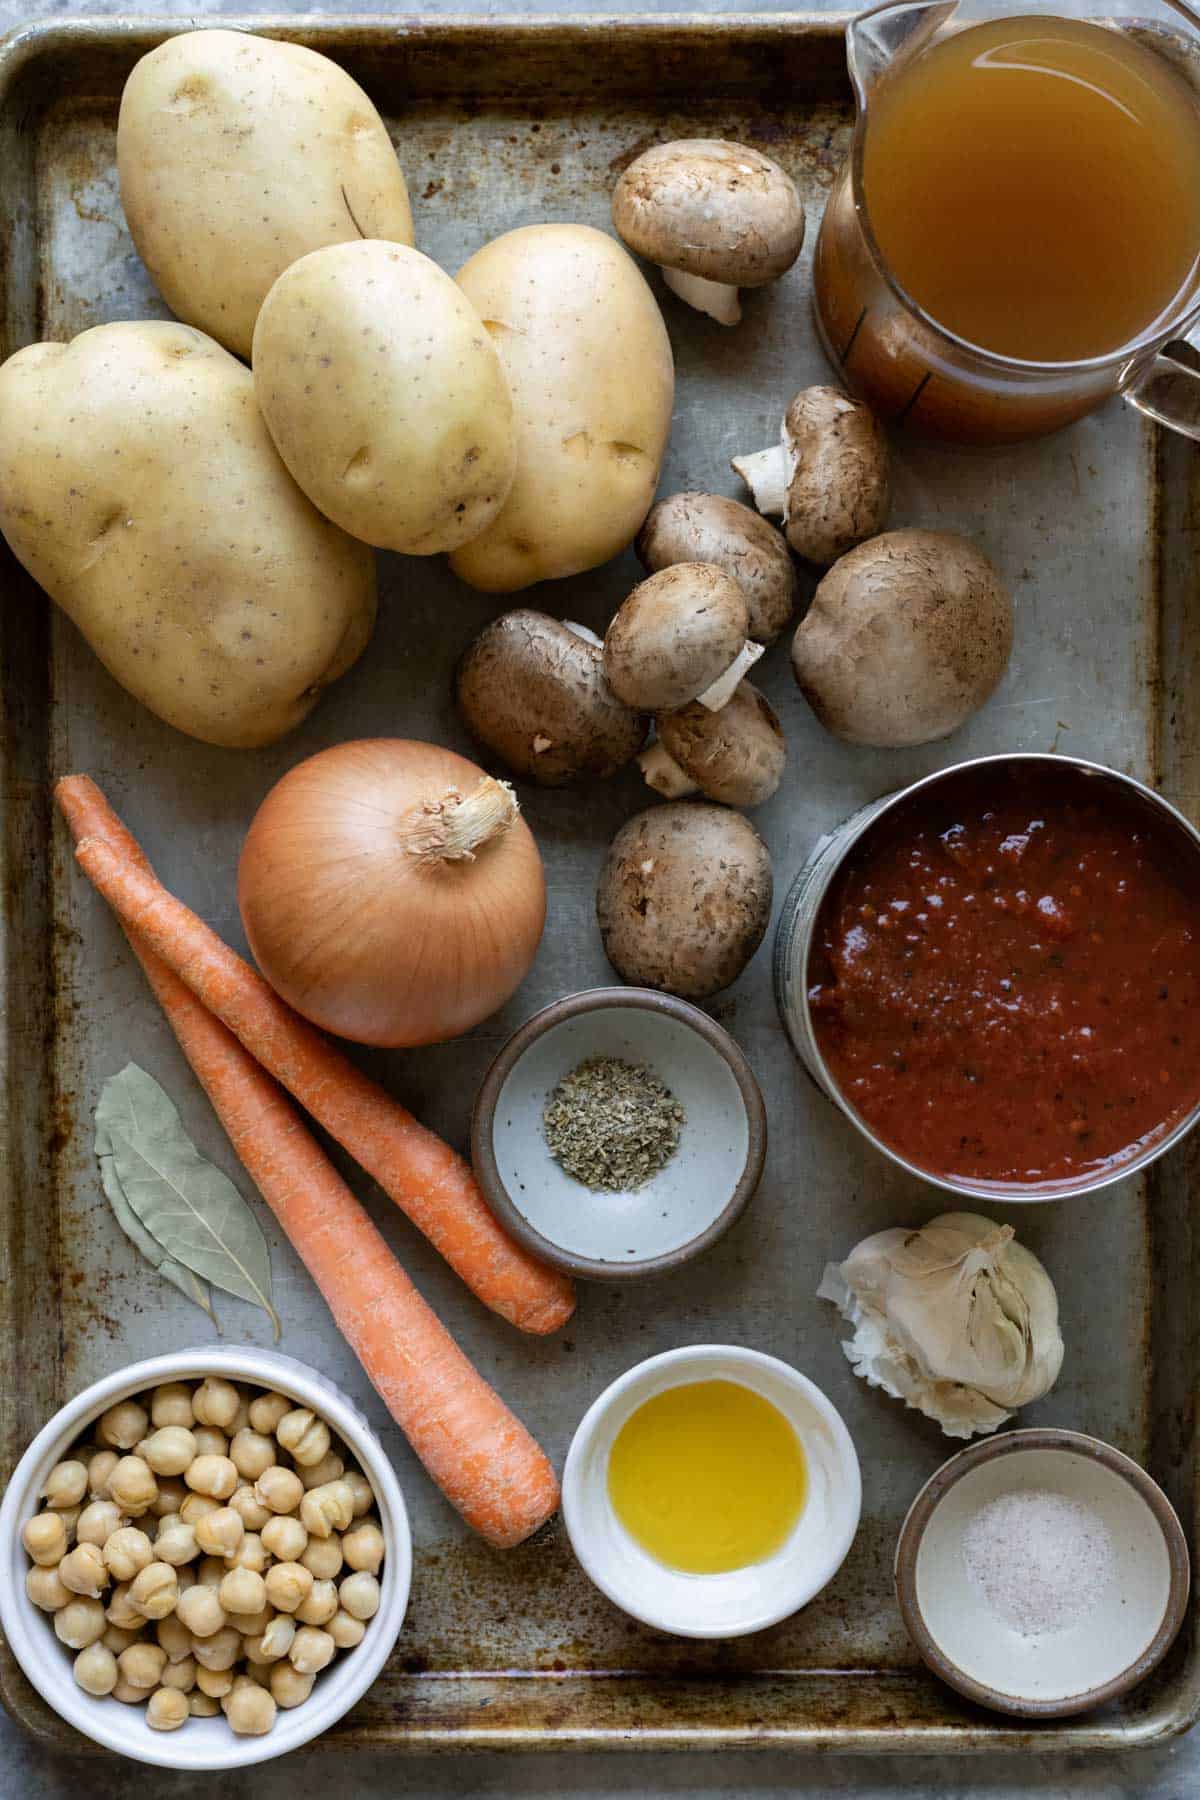 The 11 ingredients needed for potato stew spread out on a large pan.